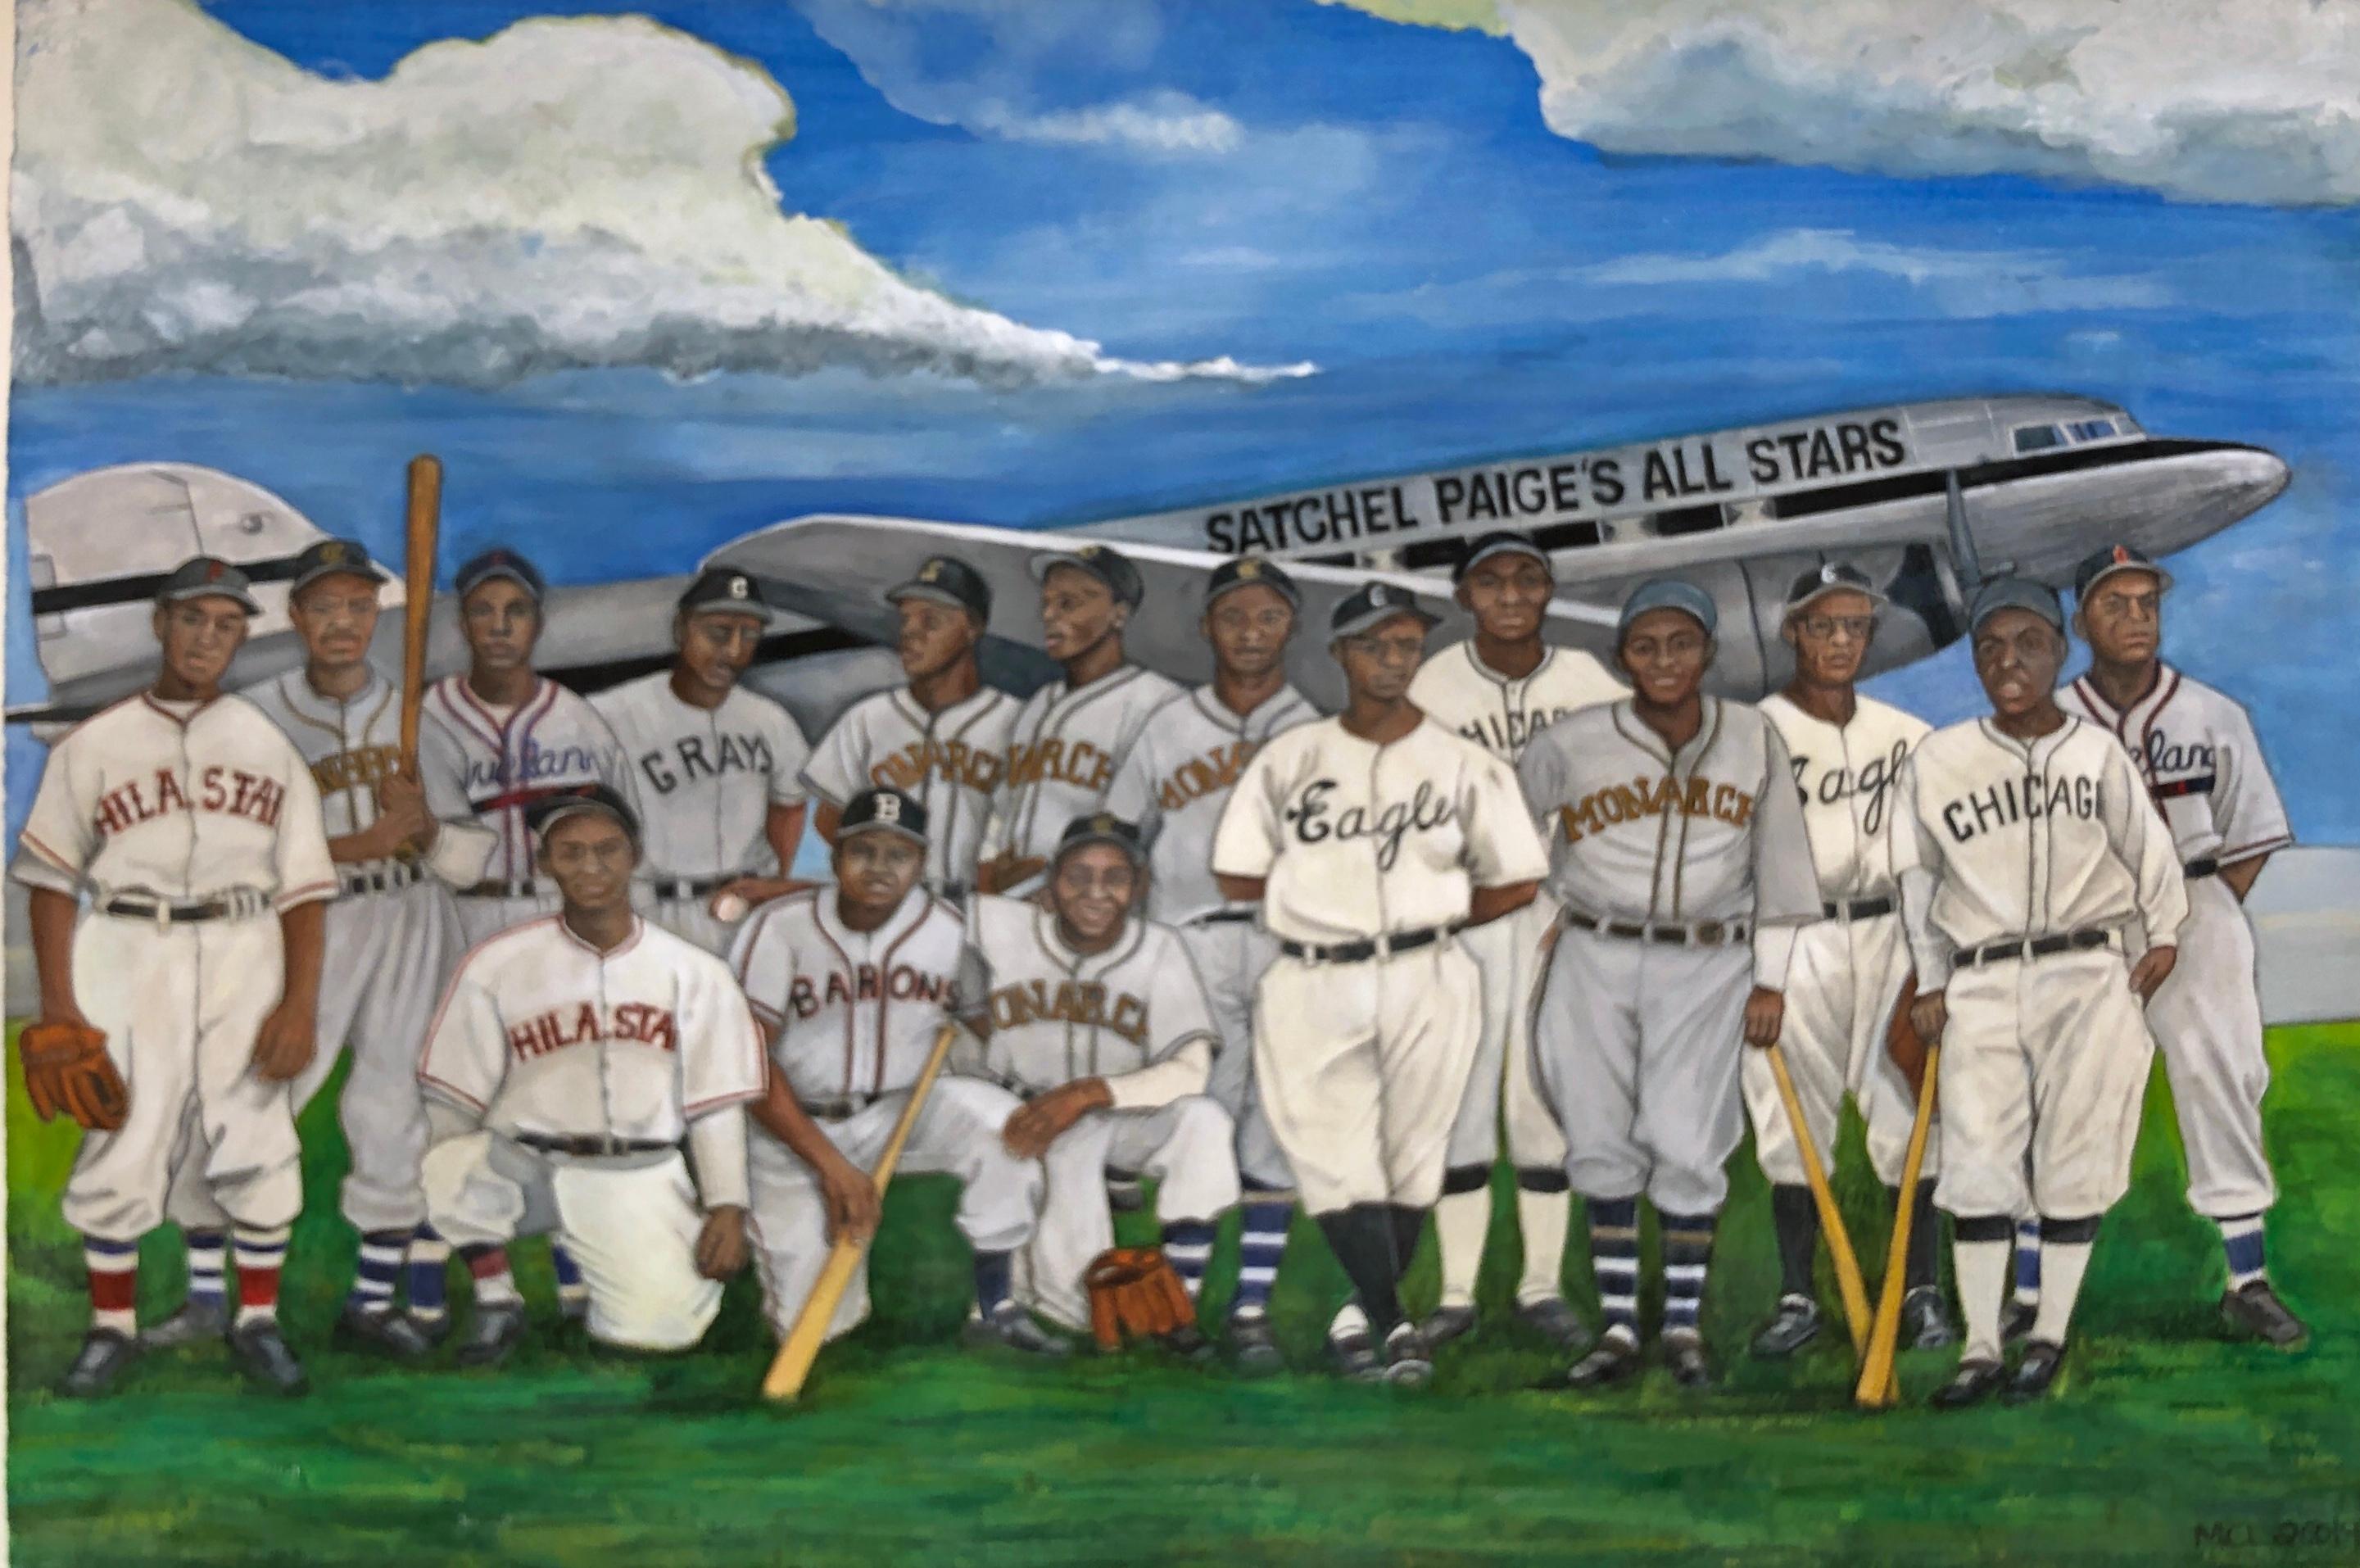 Margie Lawrence Figurative Art - Satchel Page's All Stars from 1946 Baseball Team, Original Watercolor on Paper